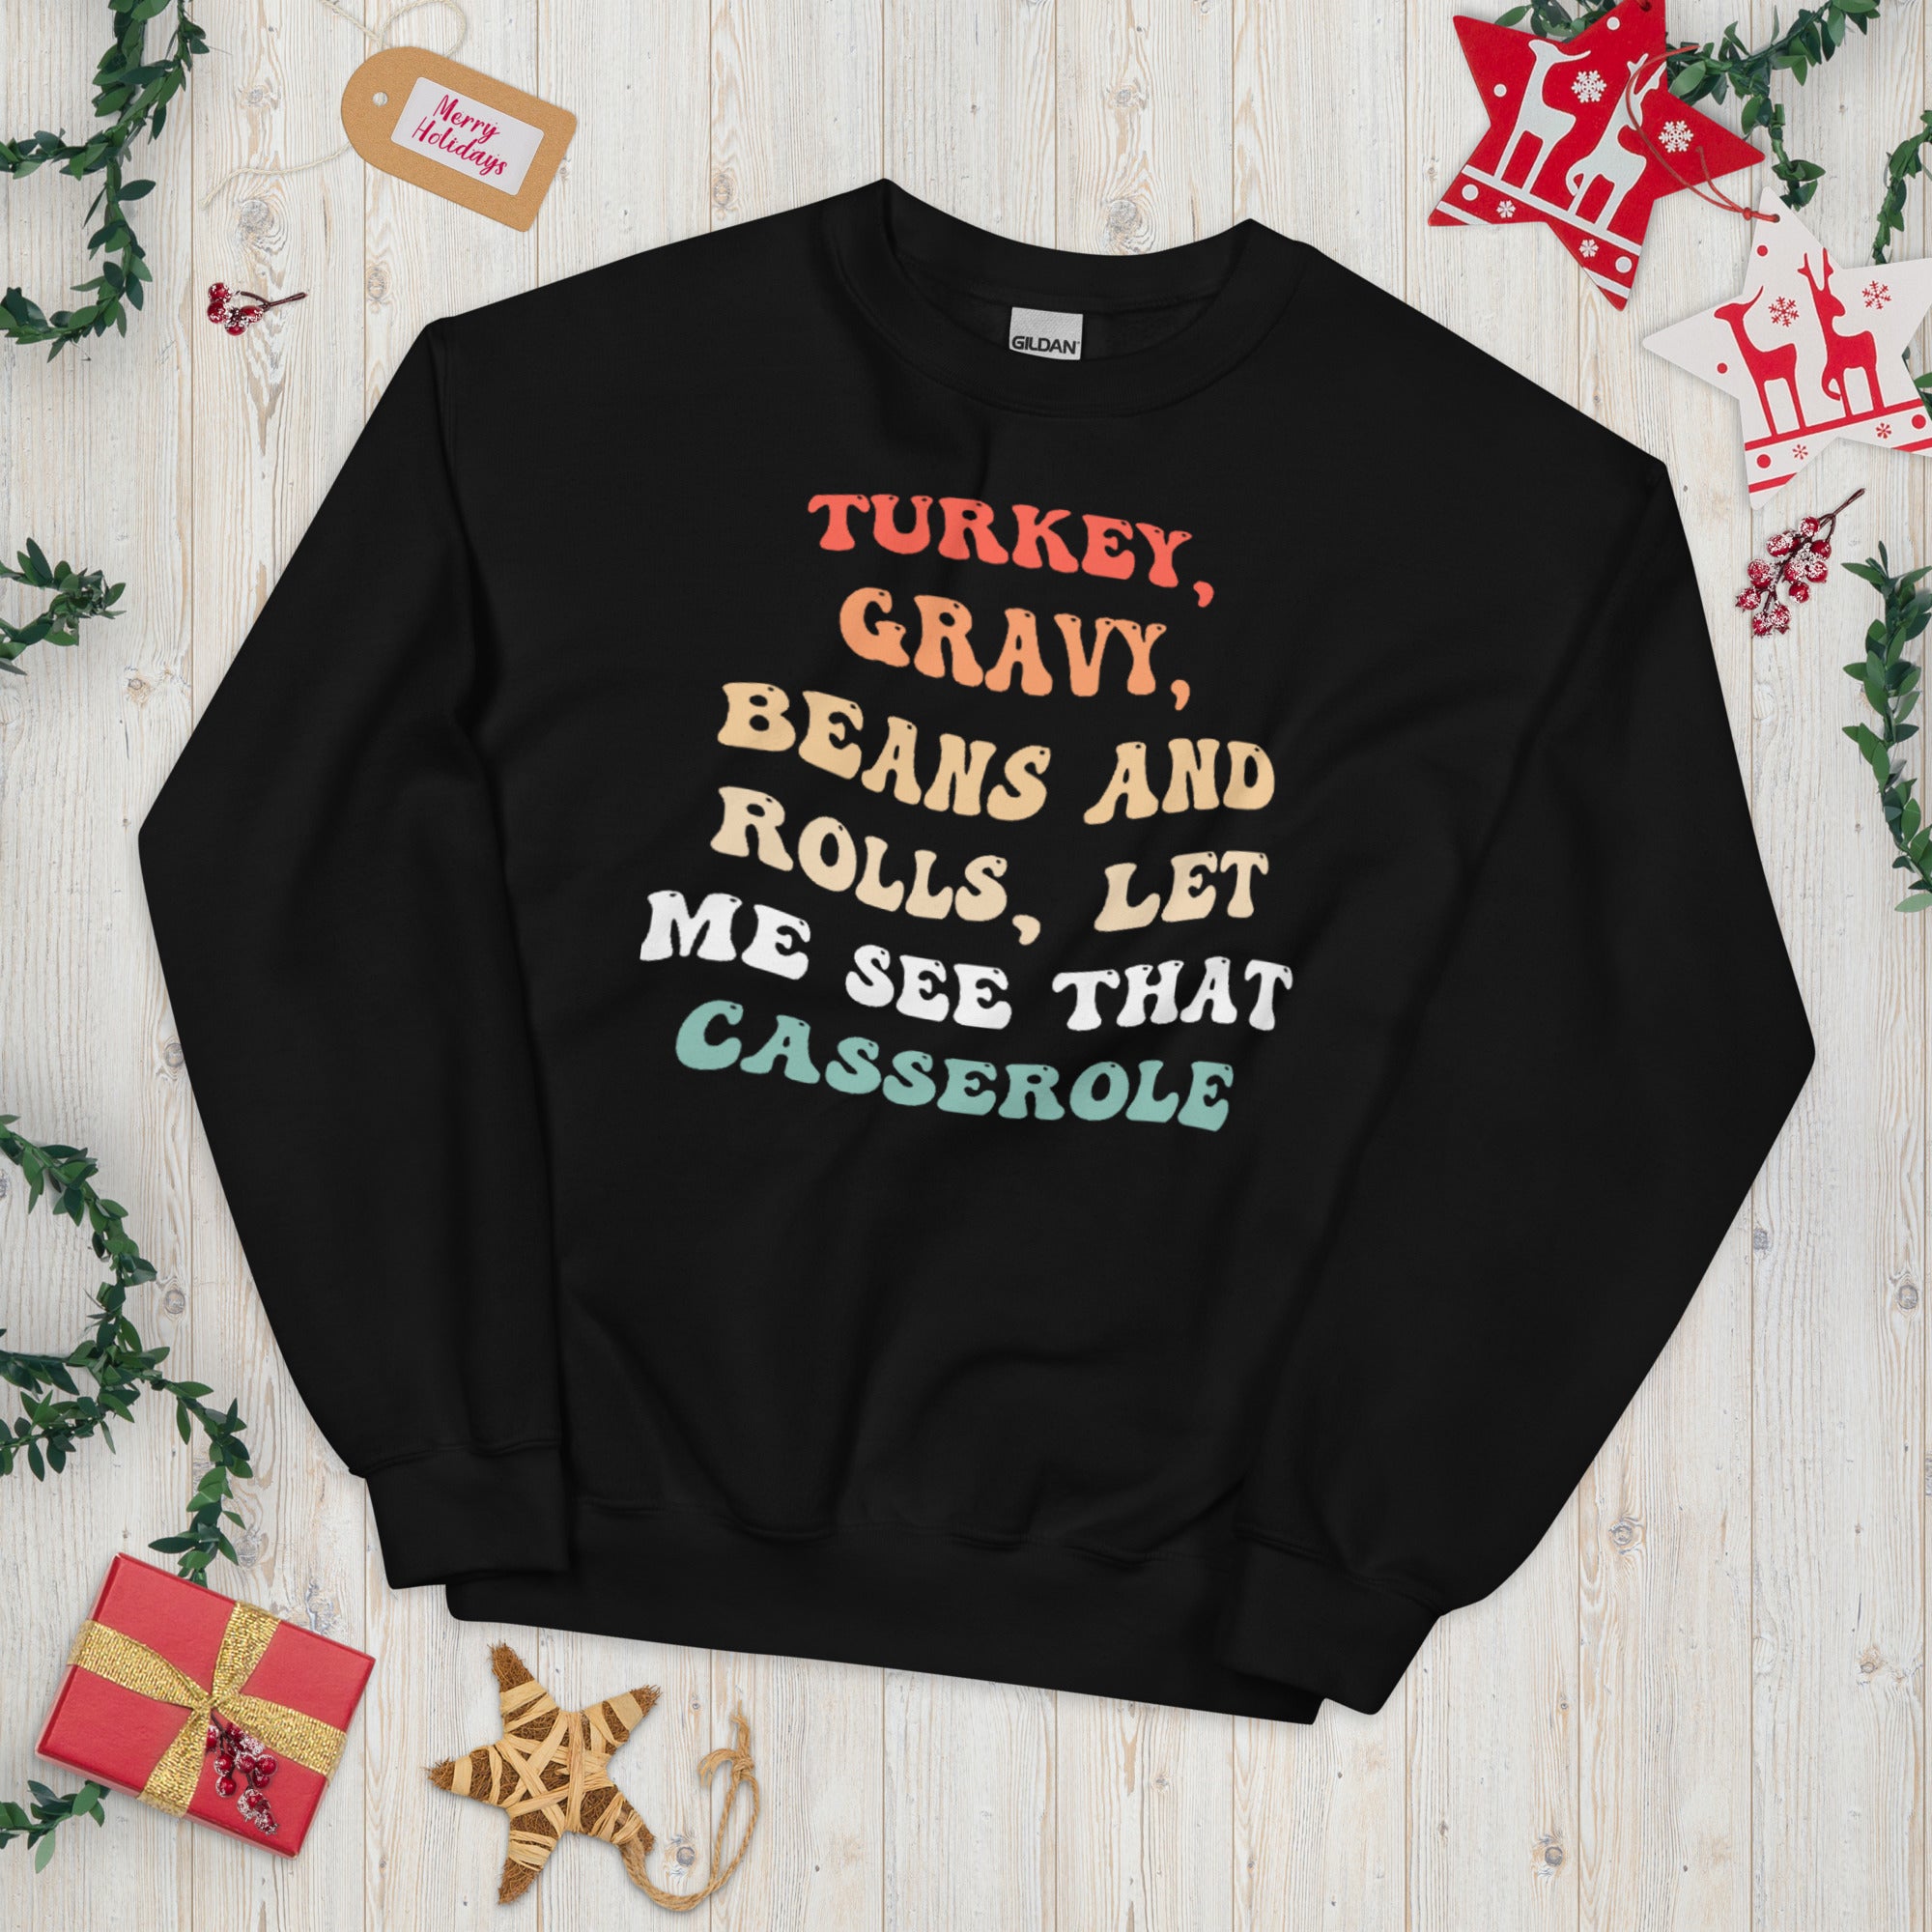 Turkey Gravy Beans And Rolls Let Me See That Casserole Thanksgiving Funny Sweater, Turkey Lover Groovy Sweatshirt, Family Thanksgiving Shirt - Madeinsea©